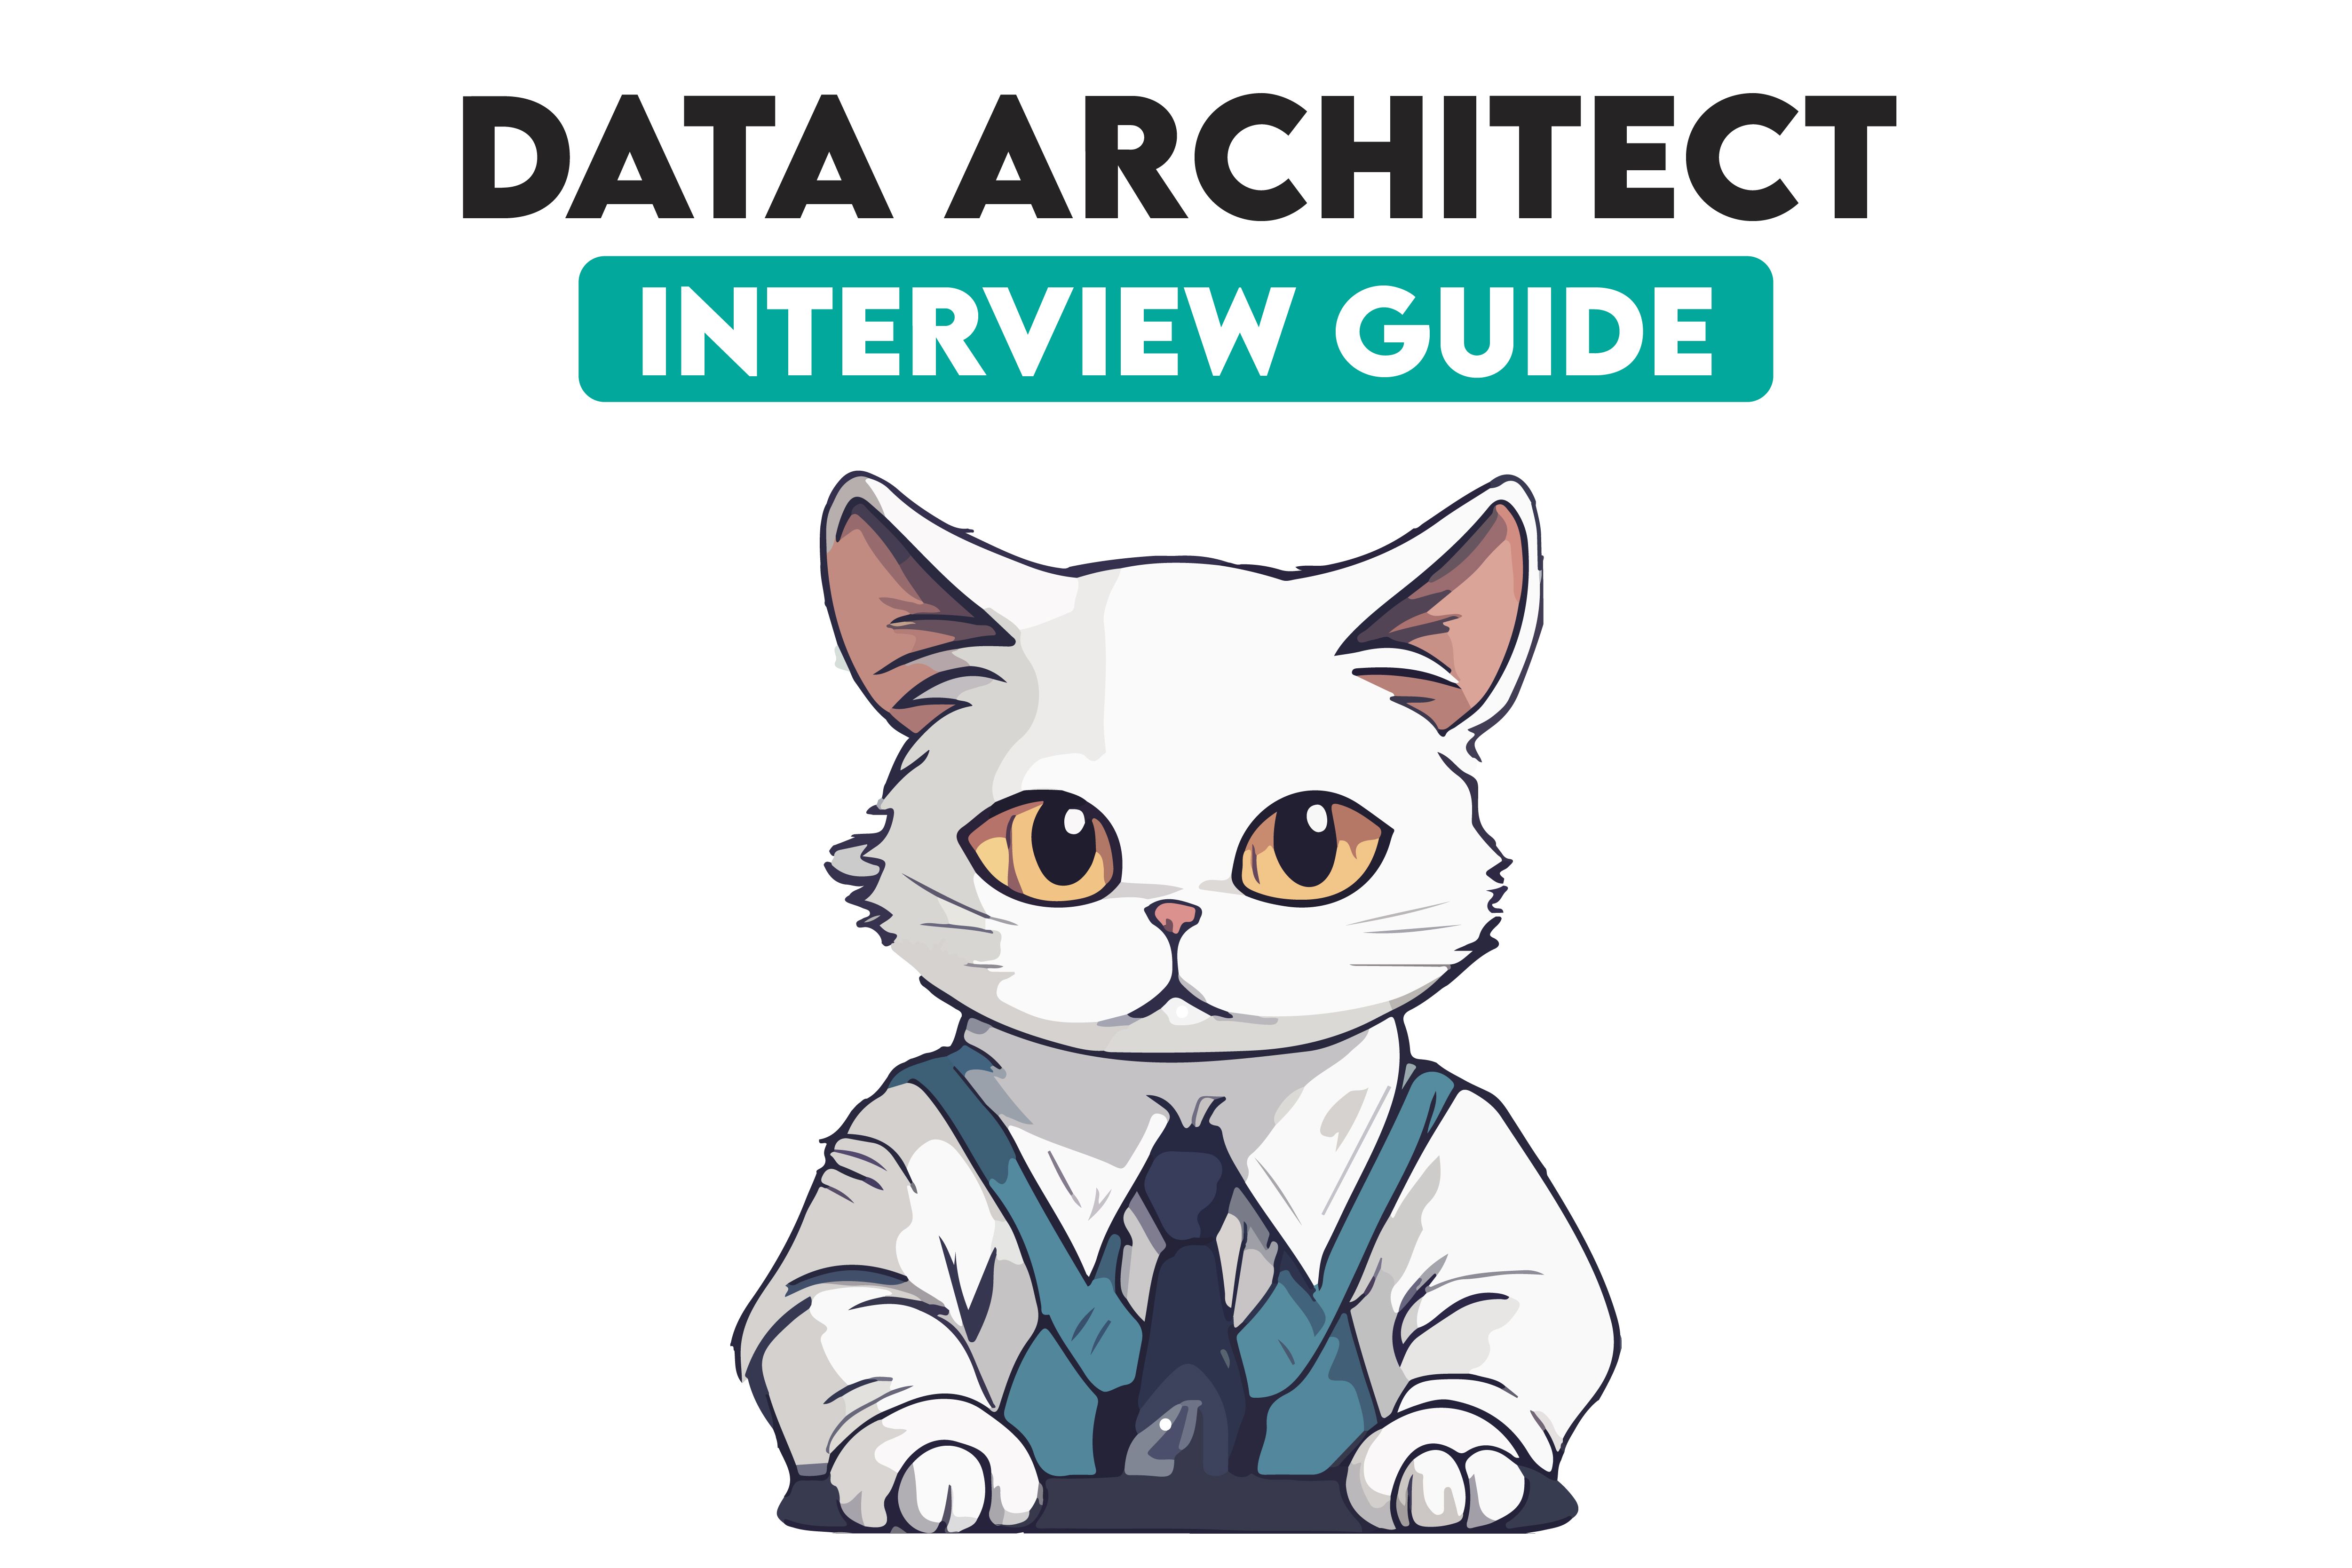 Data Architect Interview Questions You Should Be Prepared to Answer